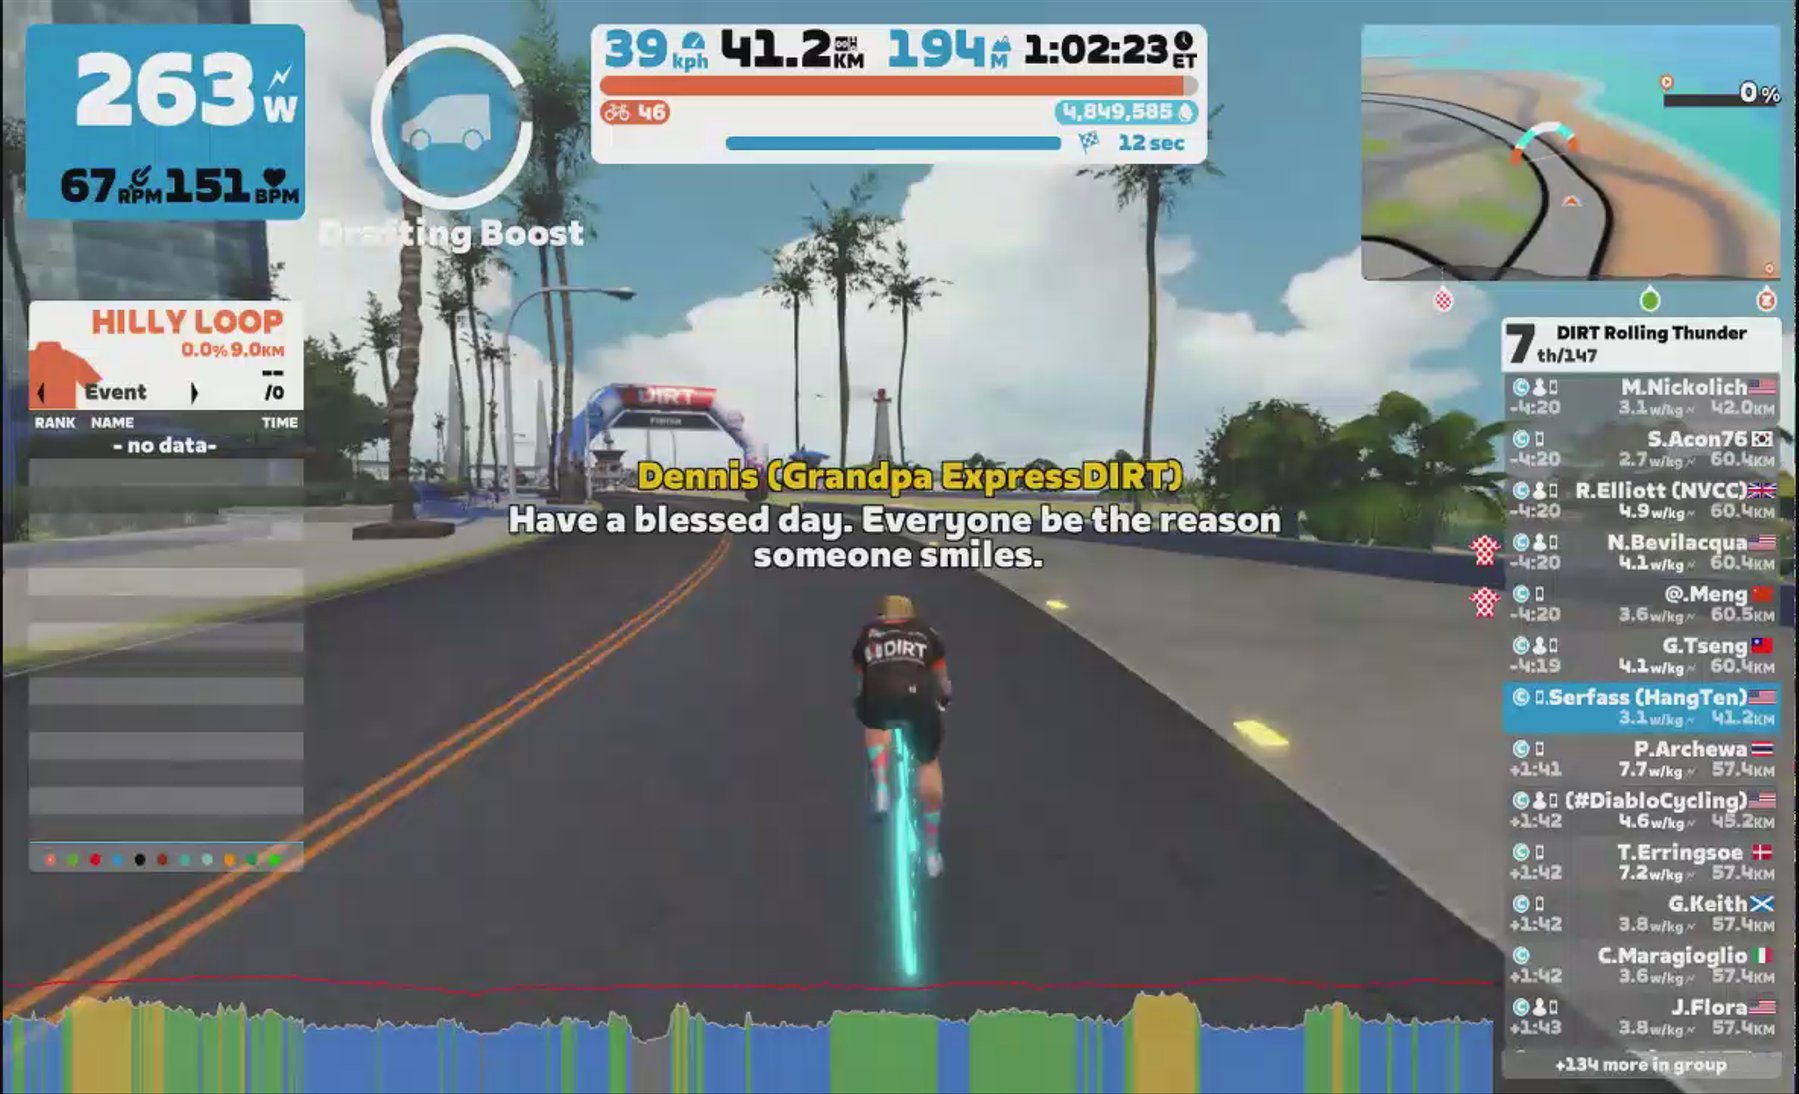 Zwift - Group Ride: DIRT Rolling Thunder (C) on The Magnificent 8 in Watopia